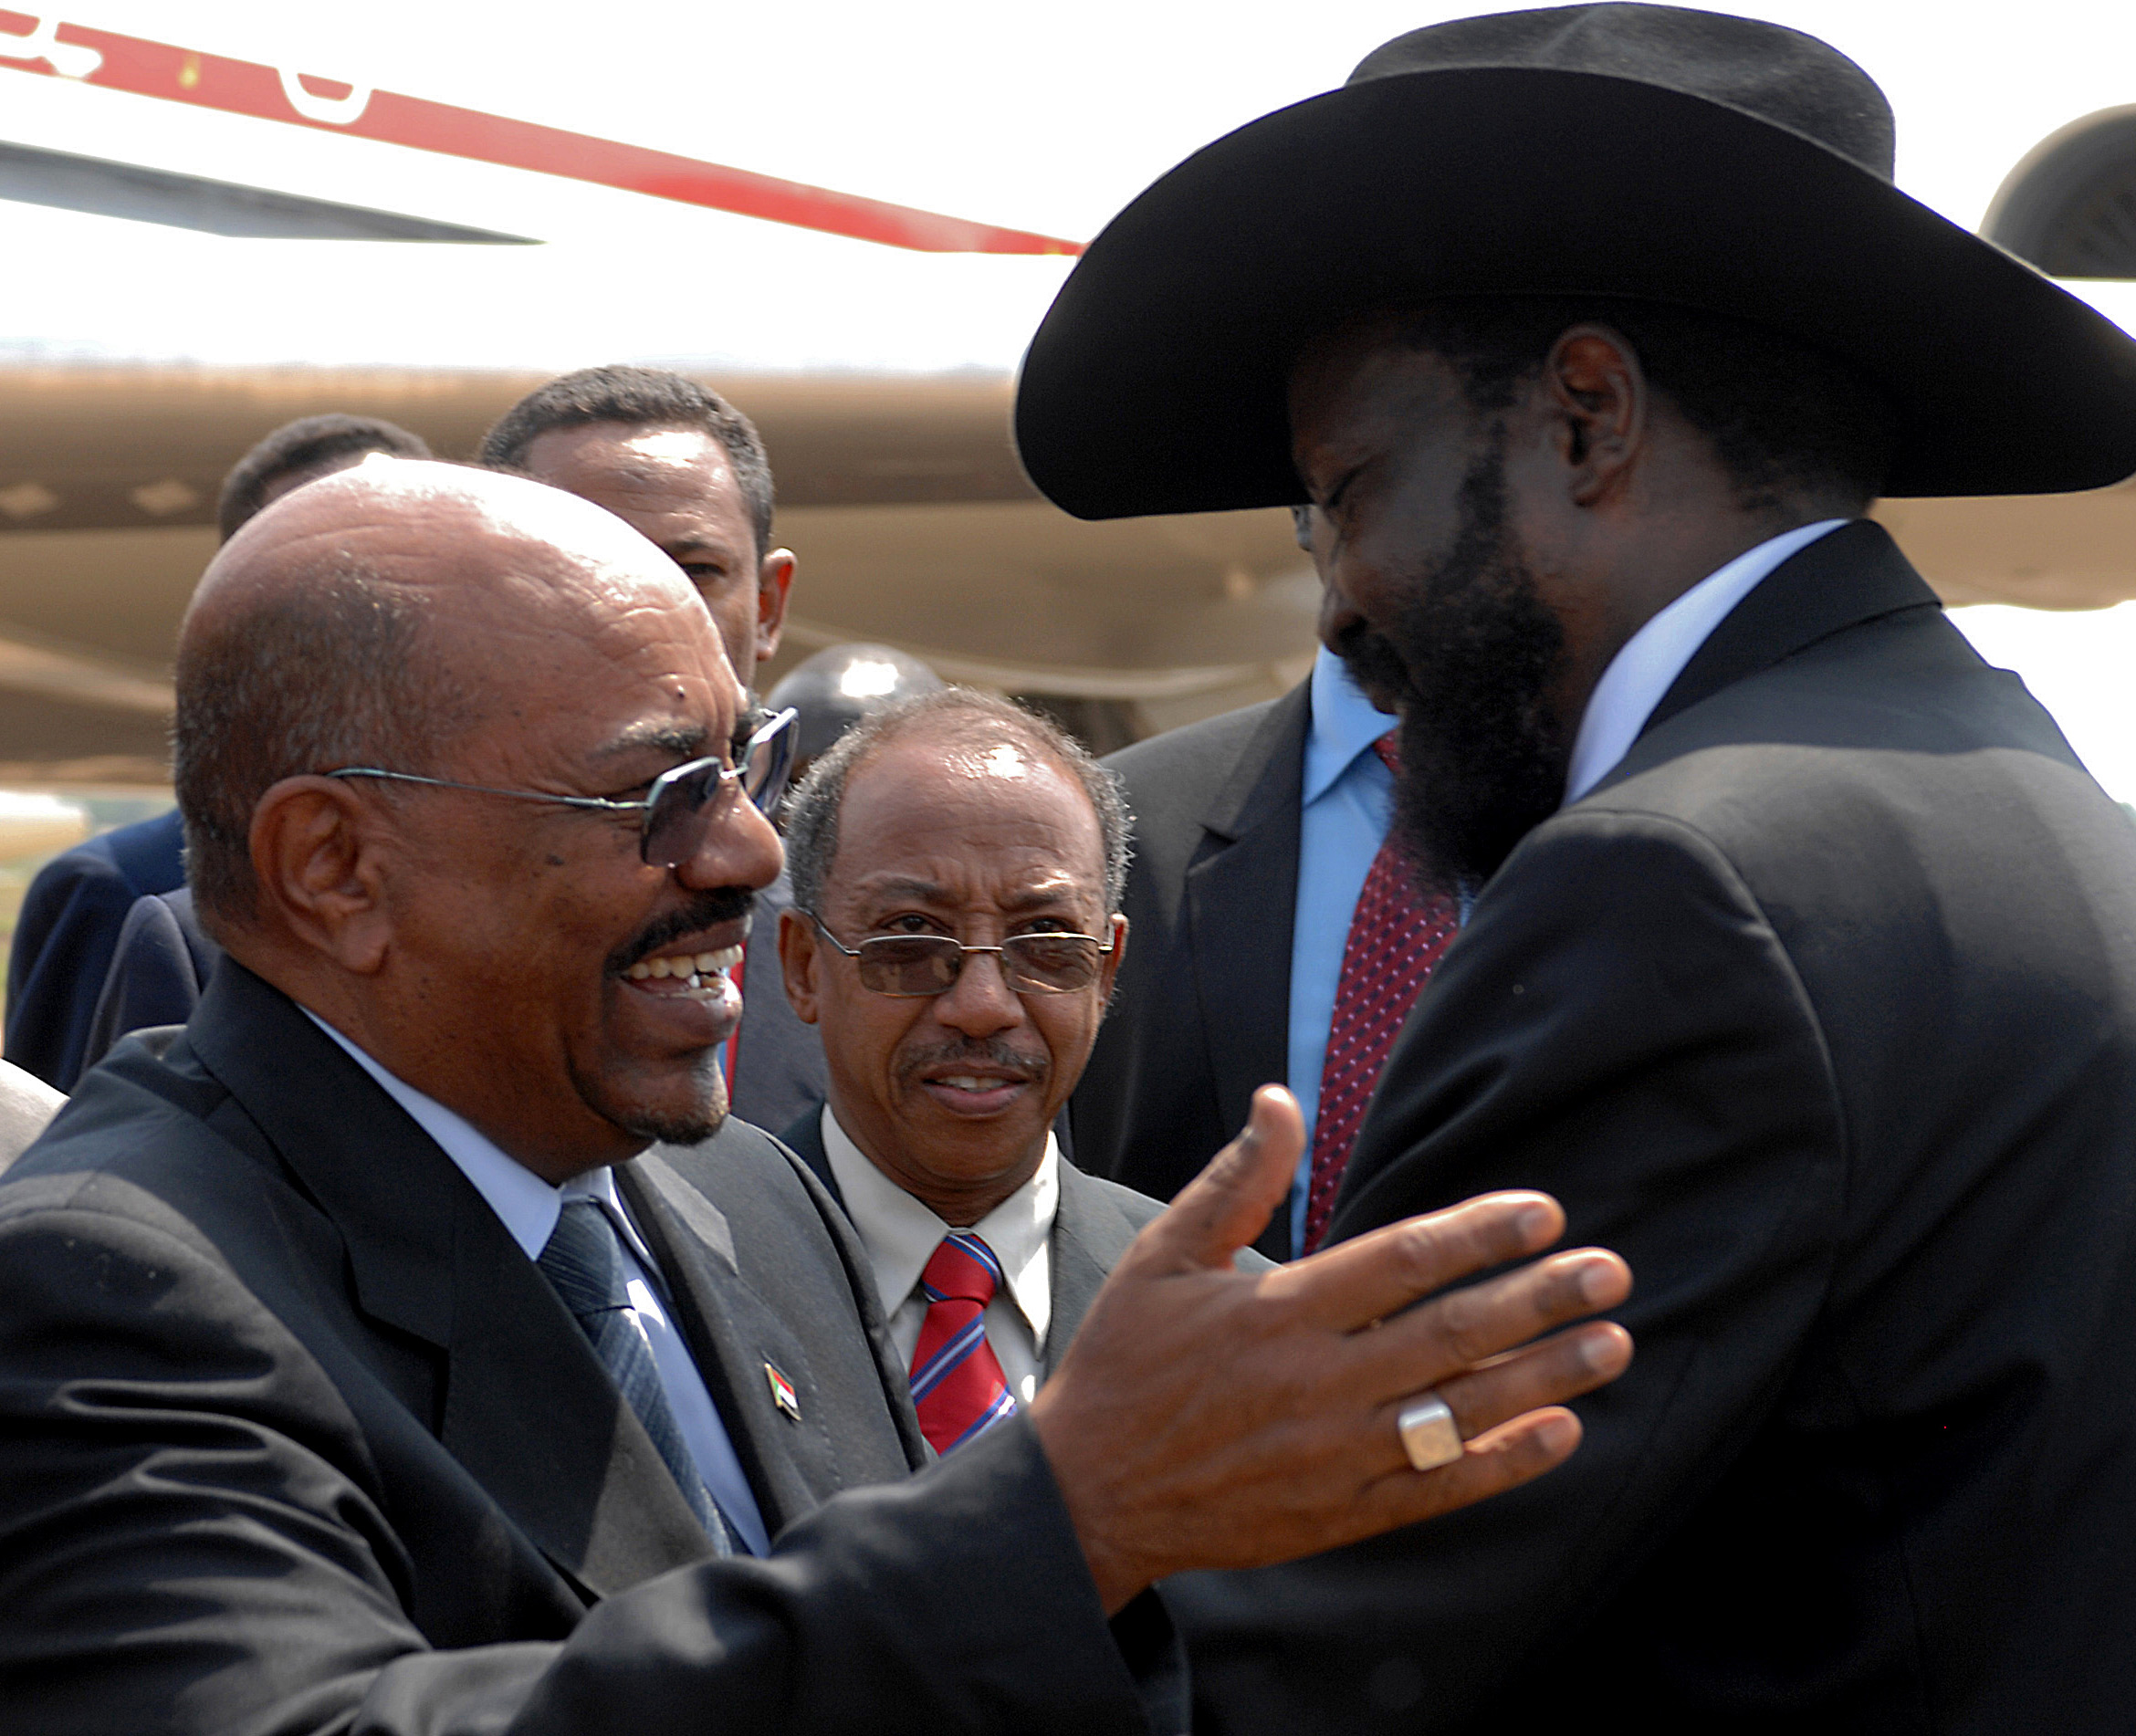 Sudan-South Sudan Field Dispatch: Good News and Bad News from Negotiations in Addis Ababa